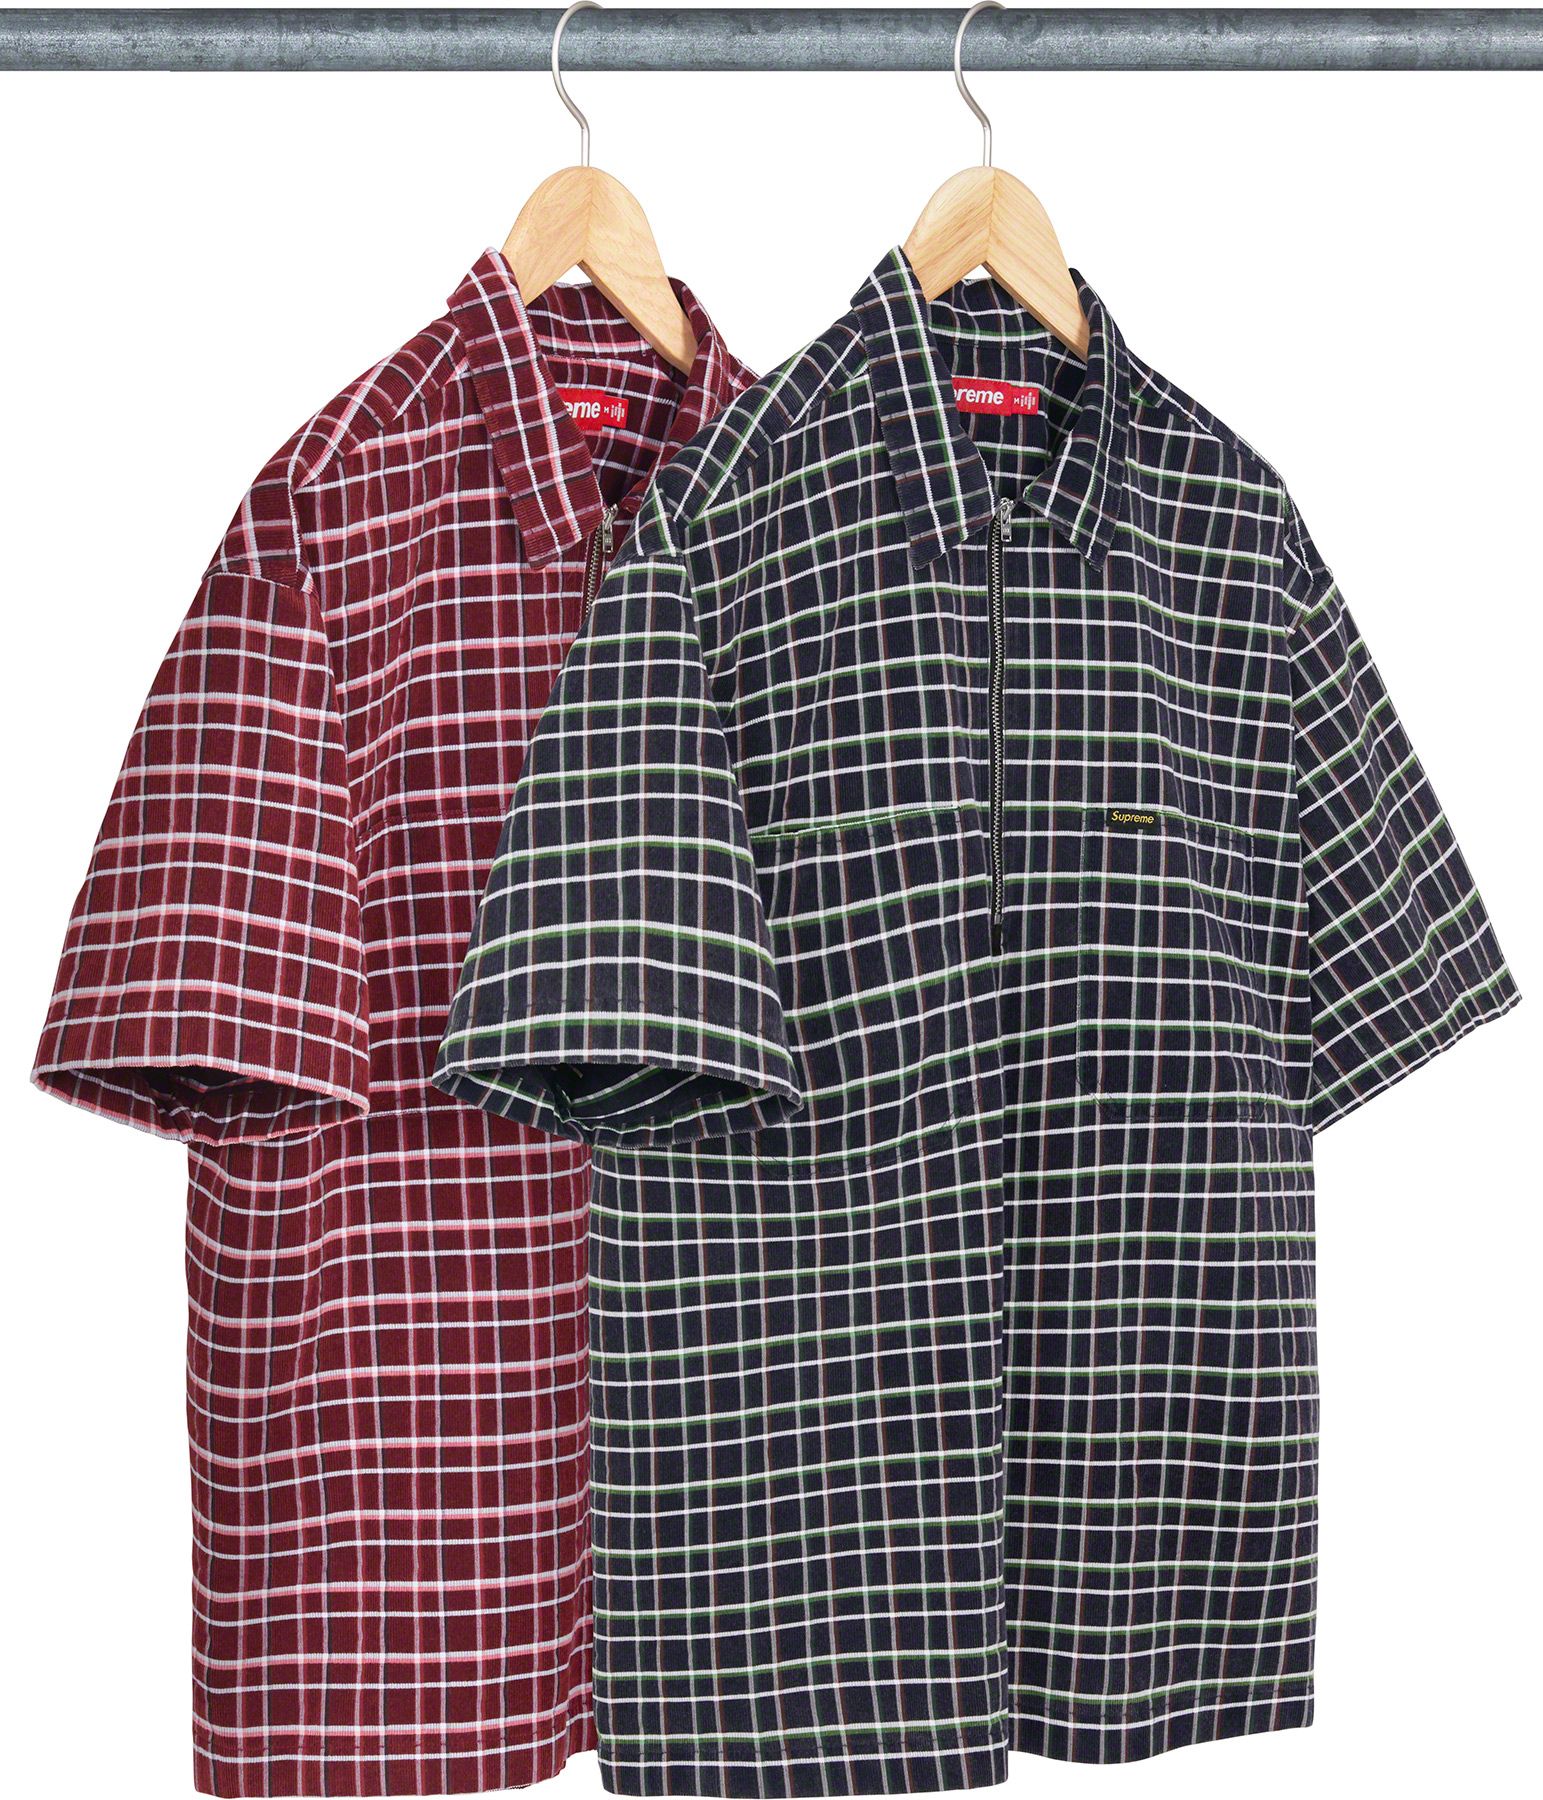 Hell S/S Shirt - Fall/Winter 2023 Preview – Supreme